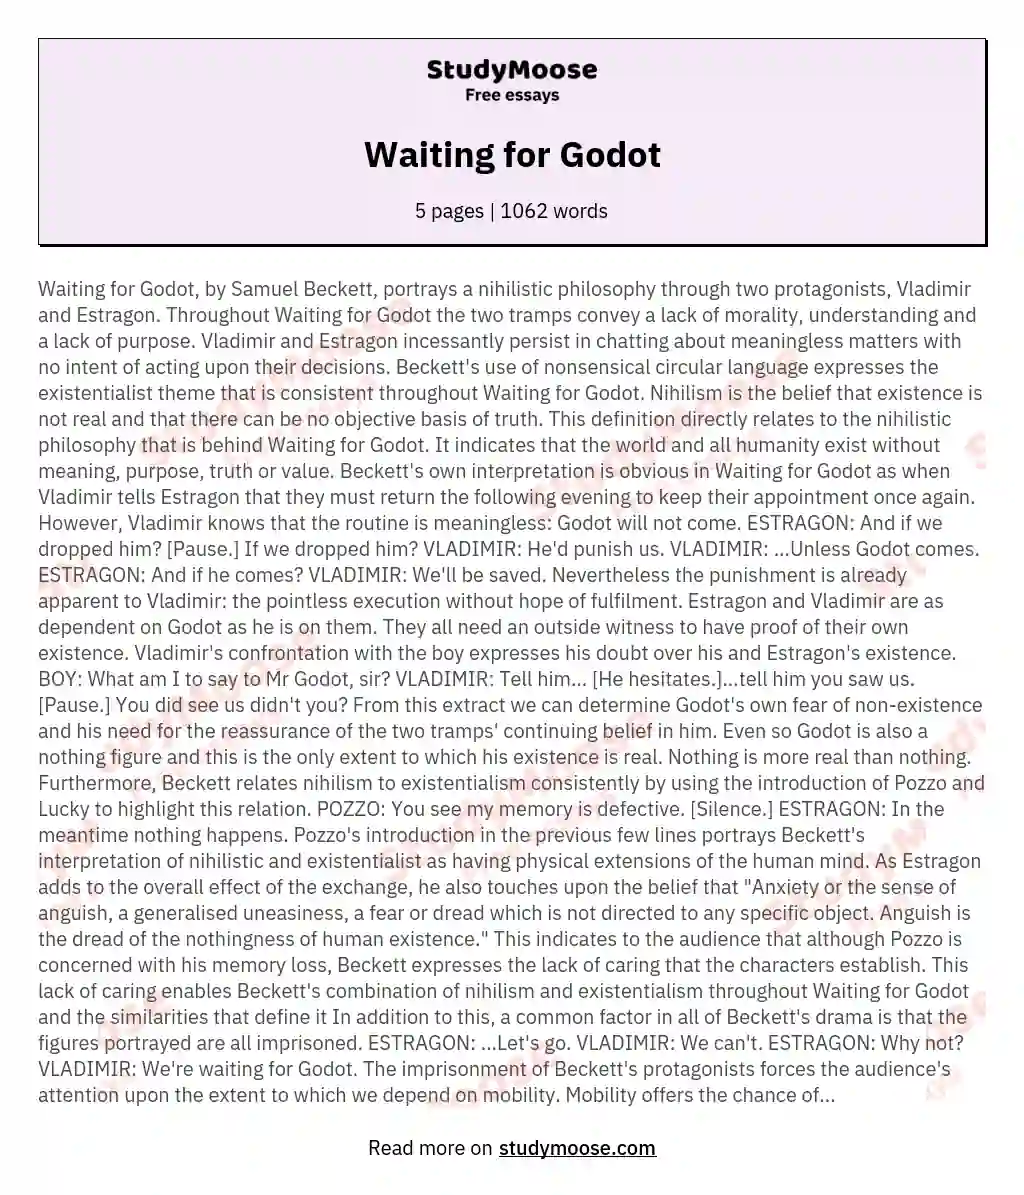 essay about waiting for godot